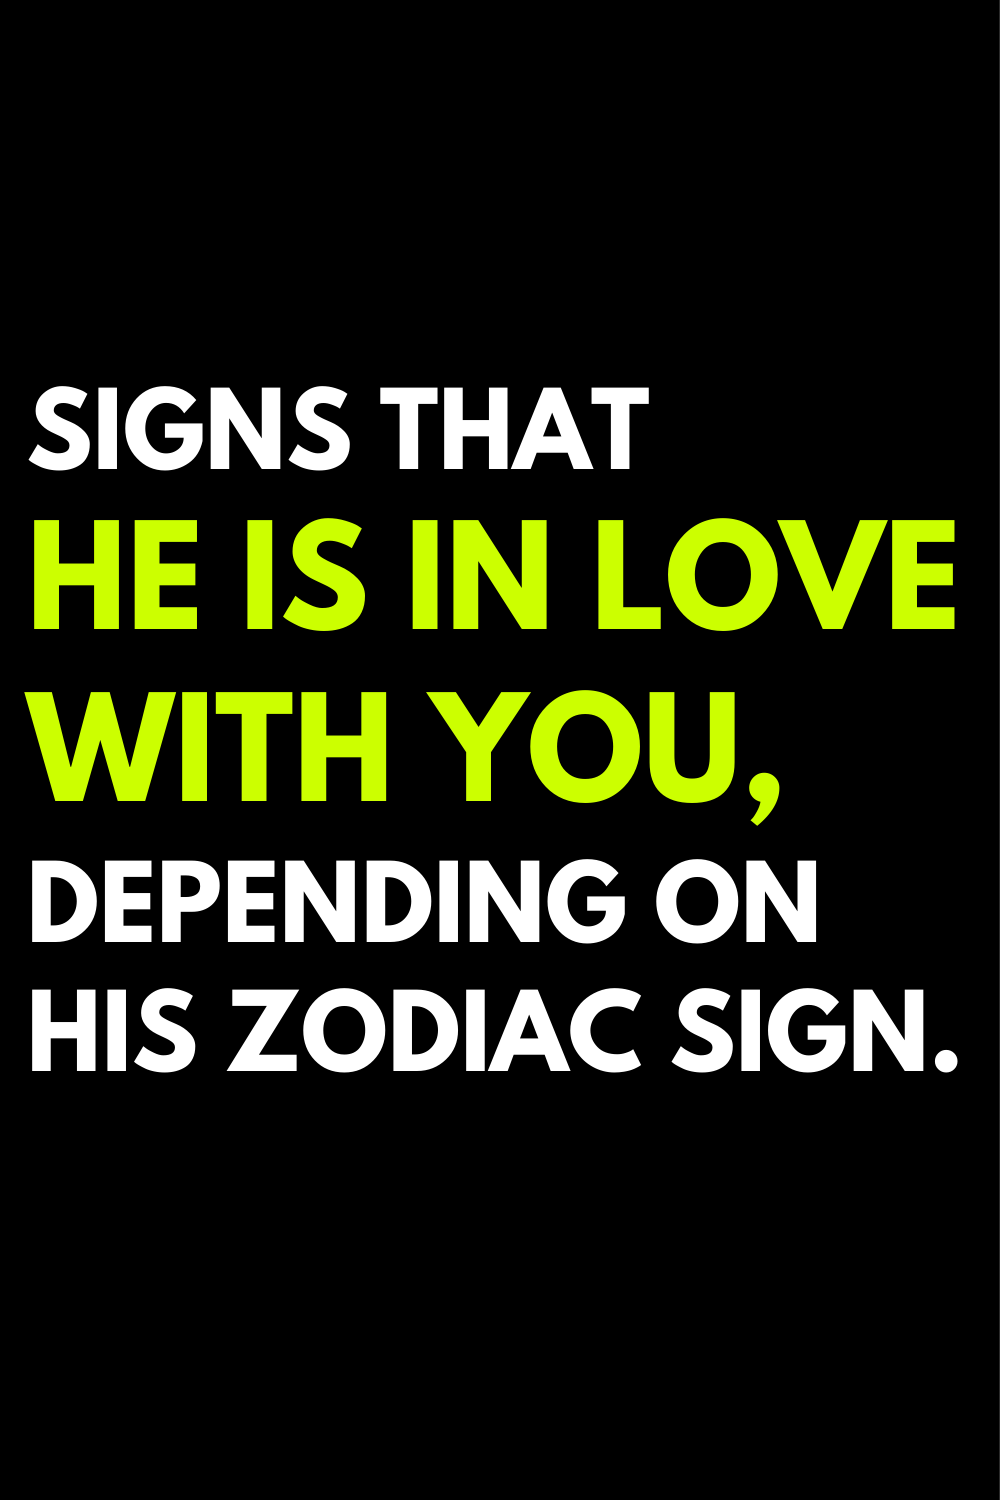 Signs that he is in love with you, depending on his zodiac sign.